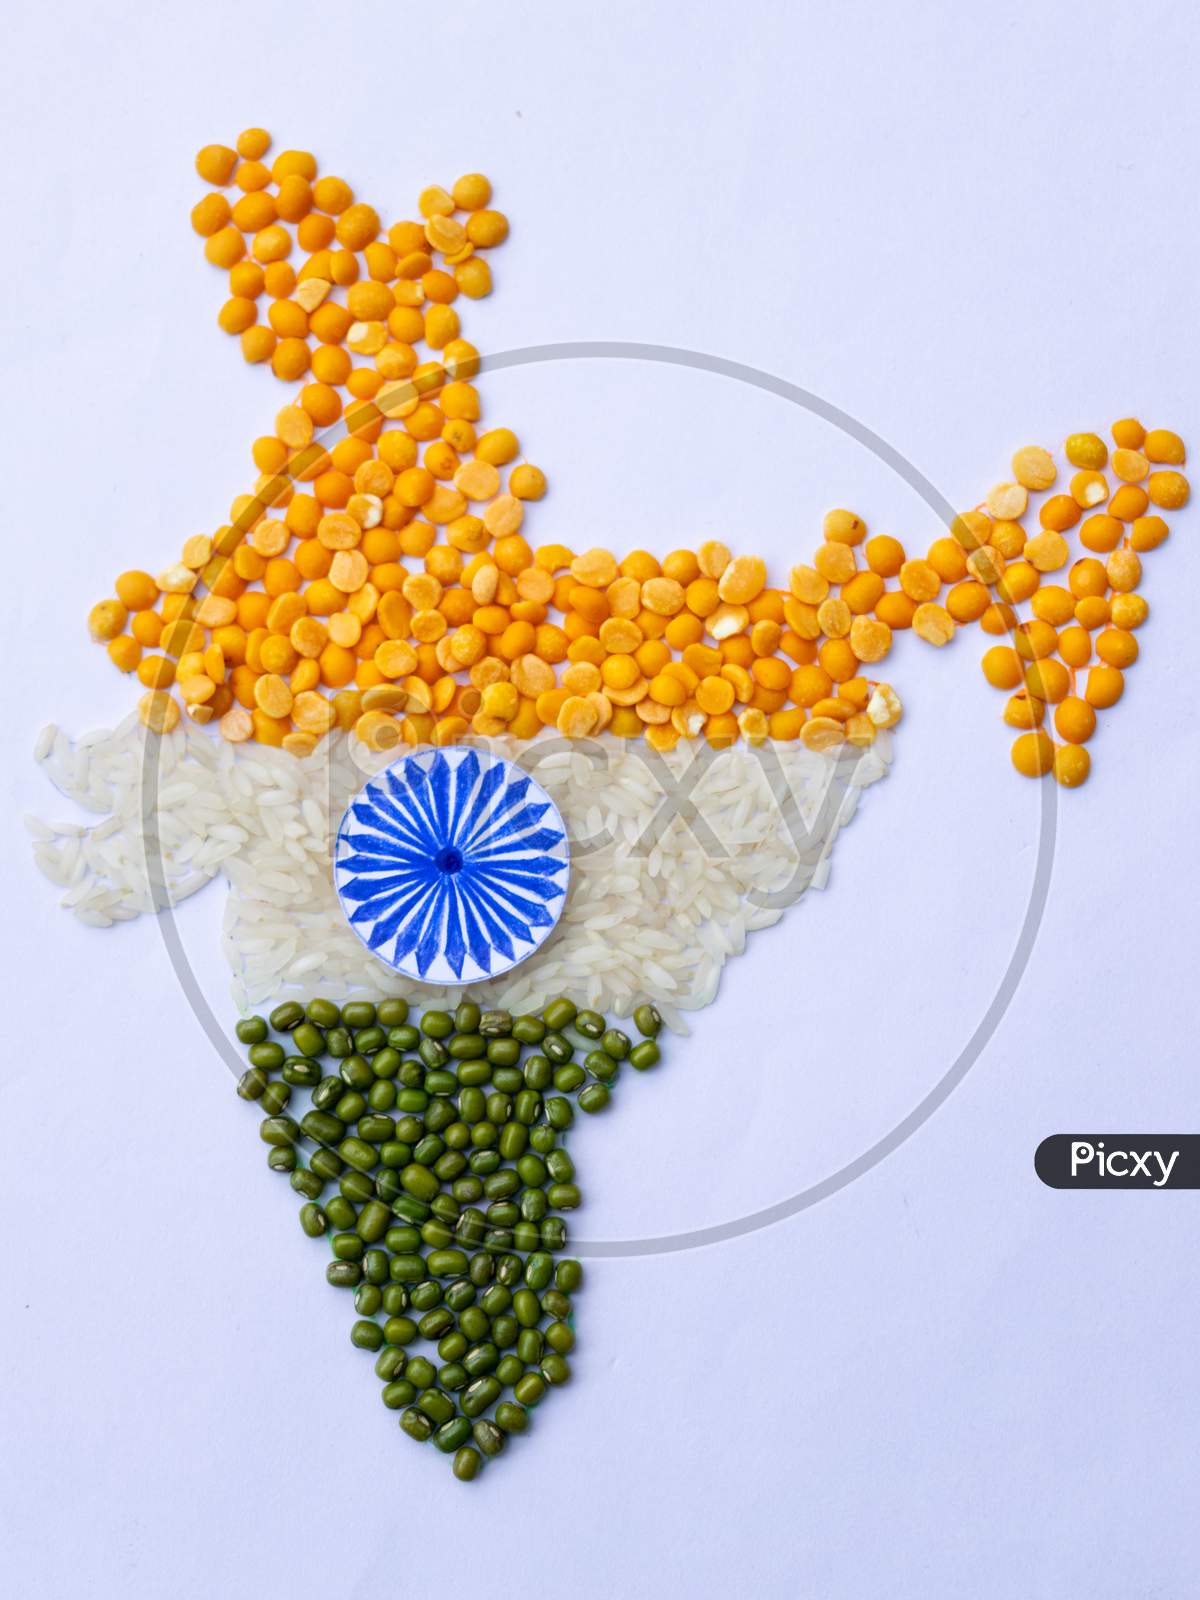 Indian map, tiranga, tricolor made with arhar dal, rice and moong dal, closeup, independence day, republic day, concept, food, image